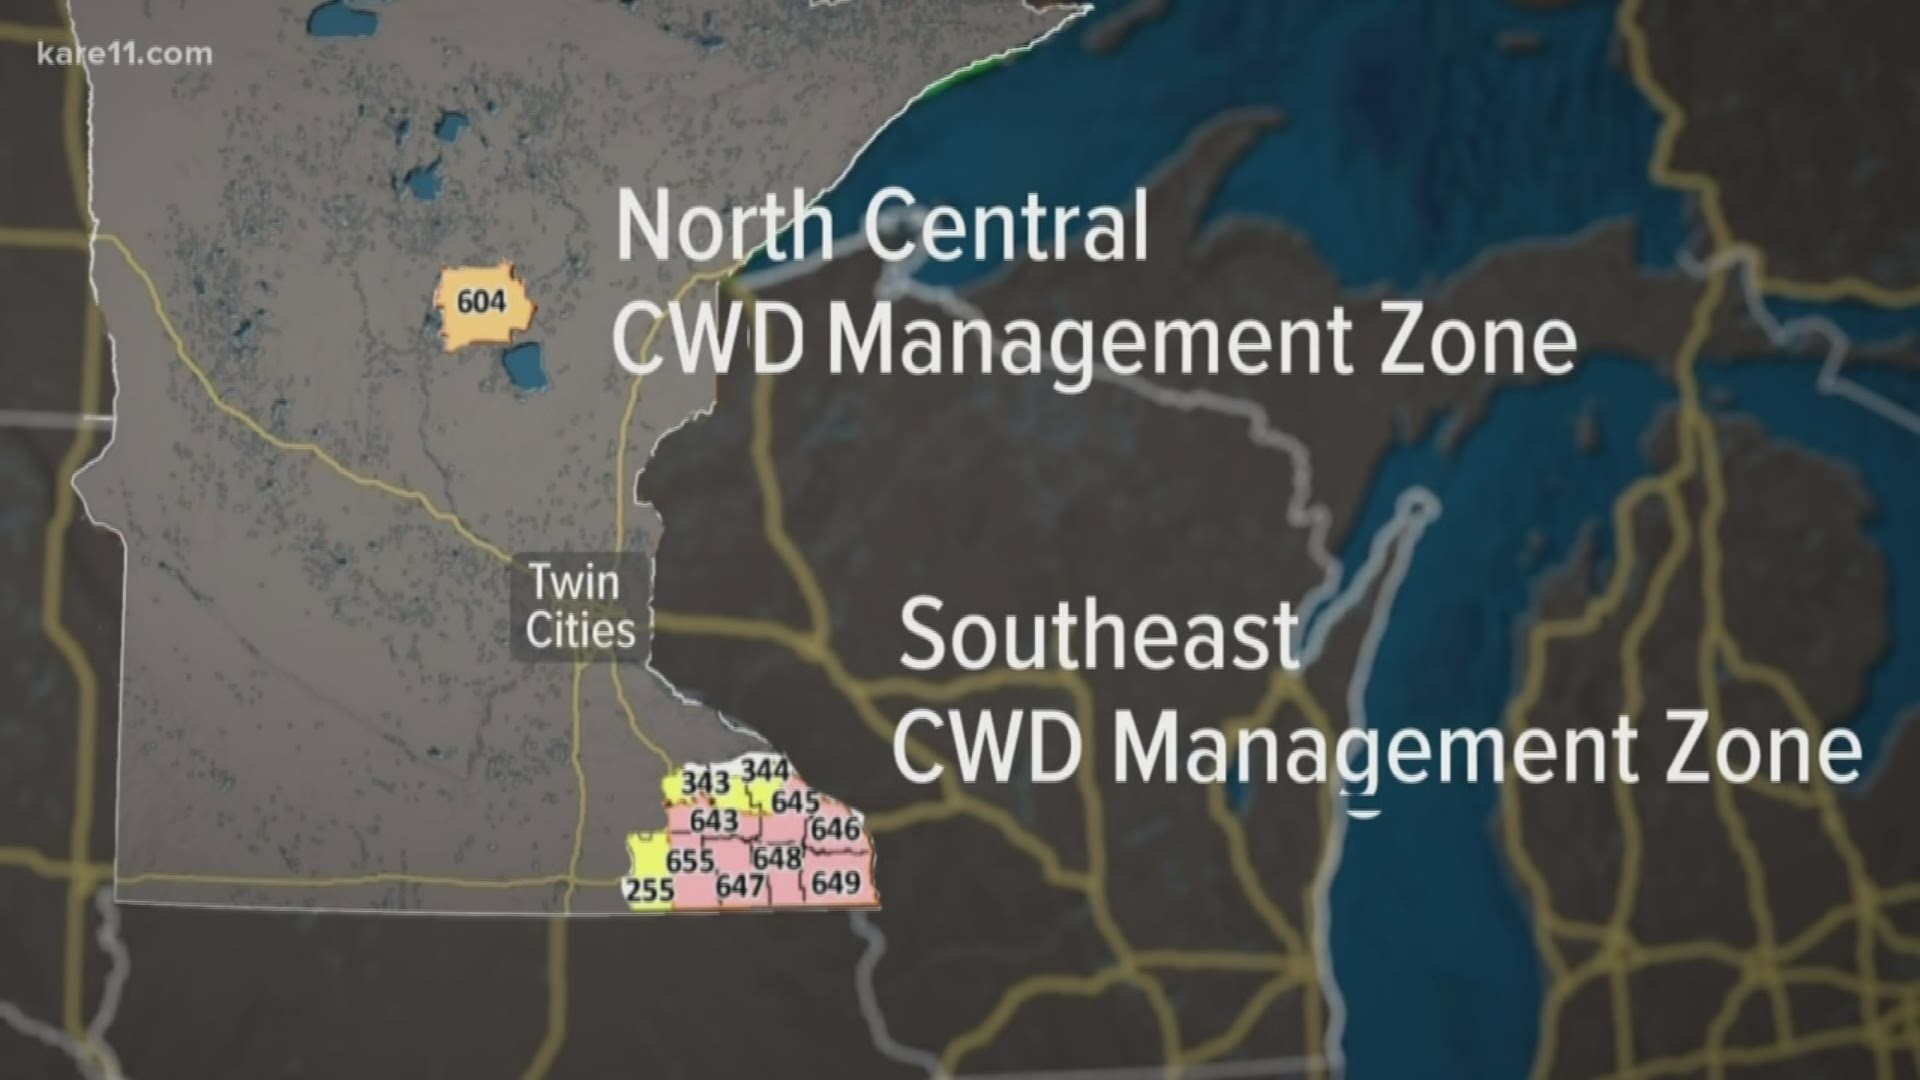 Most of Minnesota's confirmed cases have been clustered in the southeast, with a few cases in Meeker and Crow Wing County of central and north-central Minnesota.